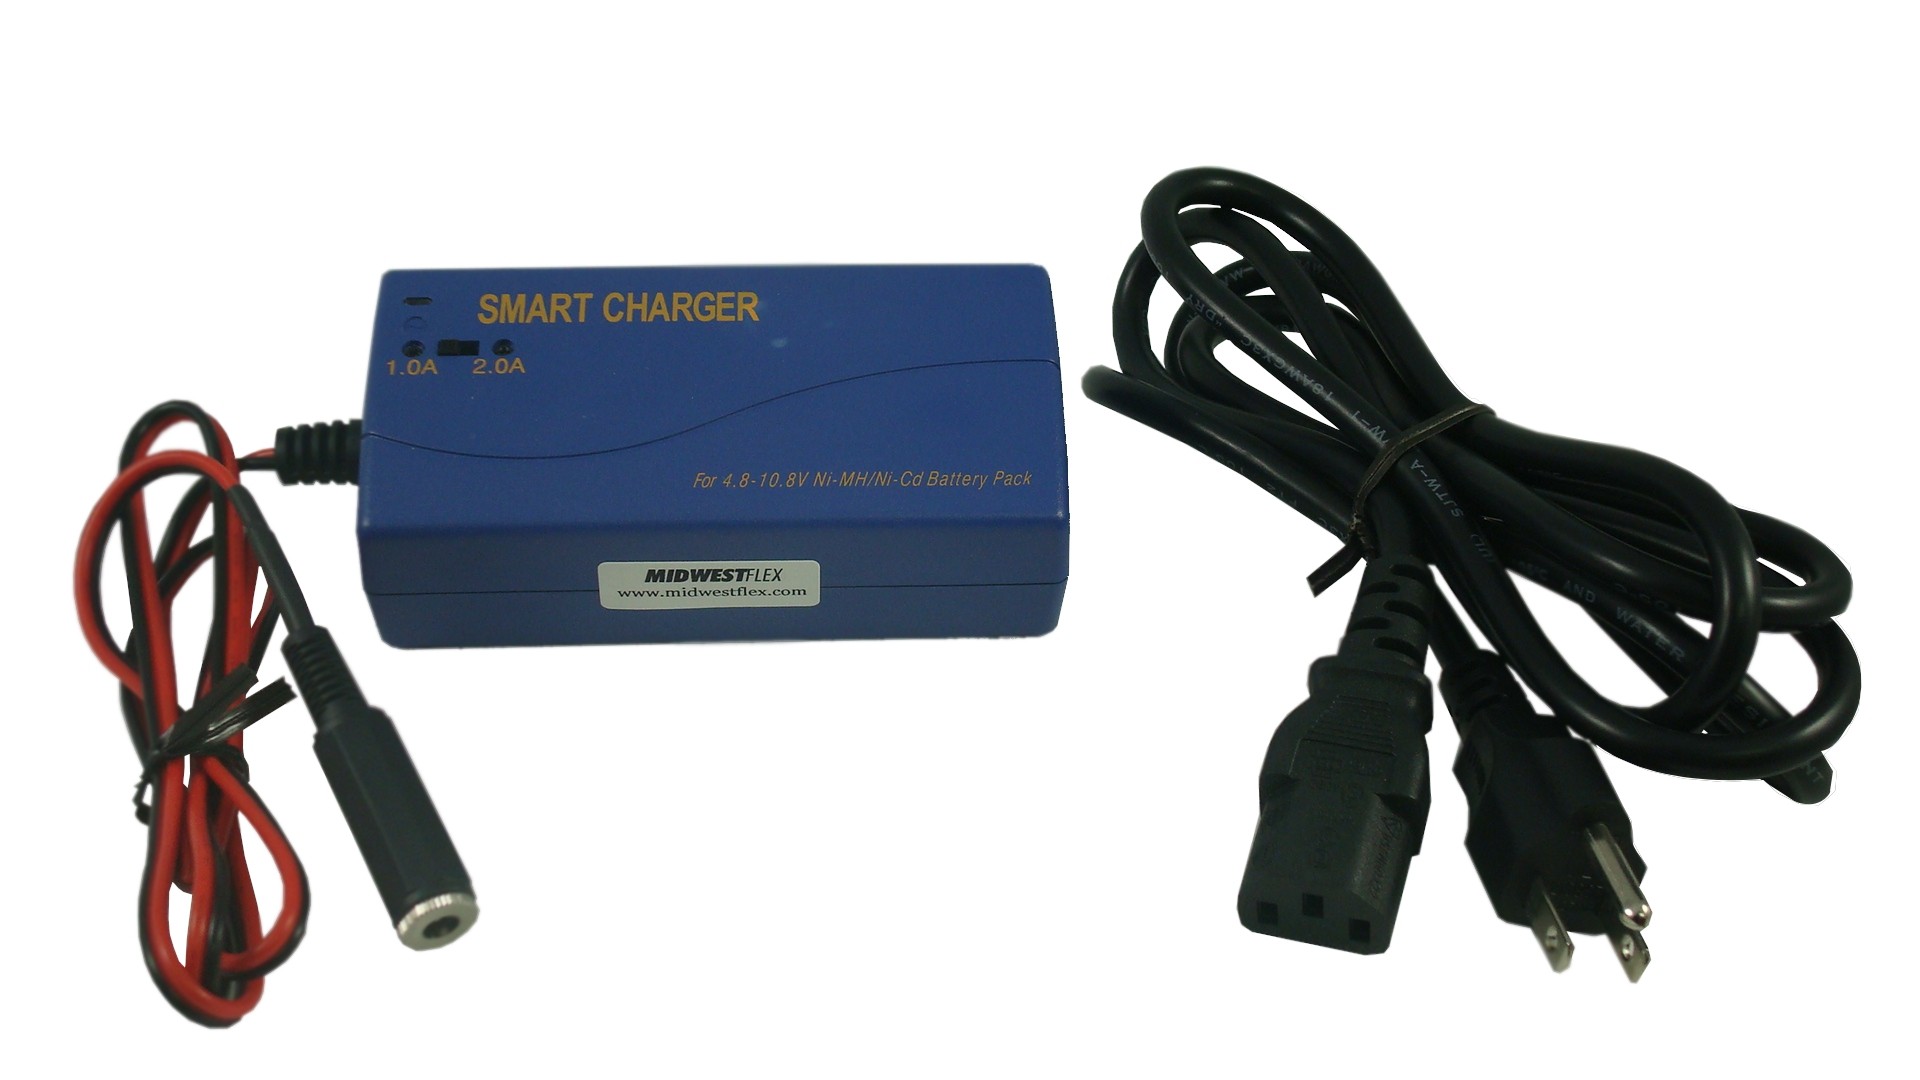 FlexBatteryPack Charger with Power Cord